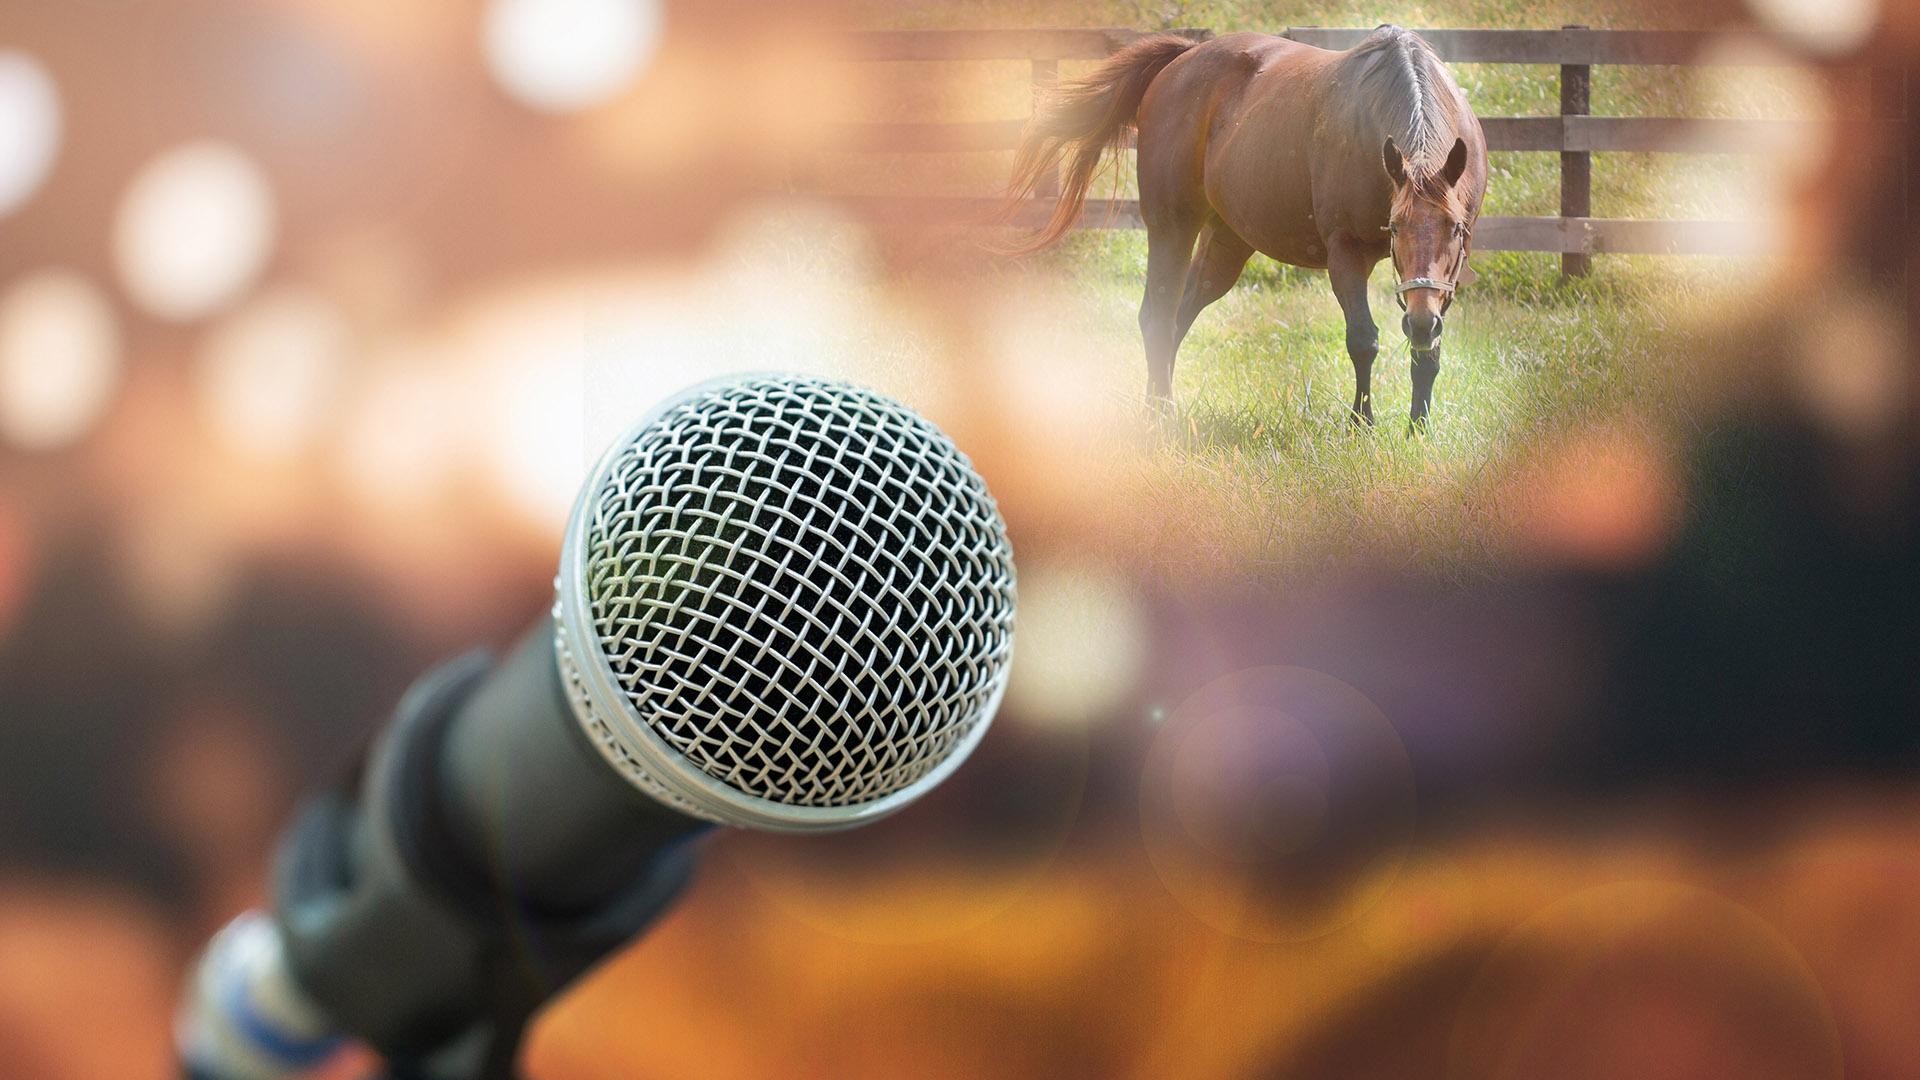 Horse and microphone